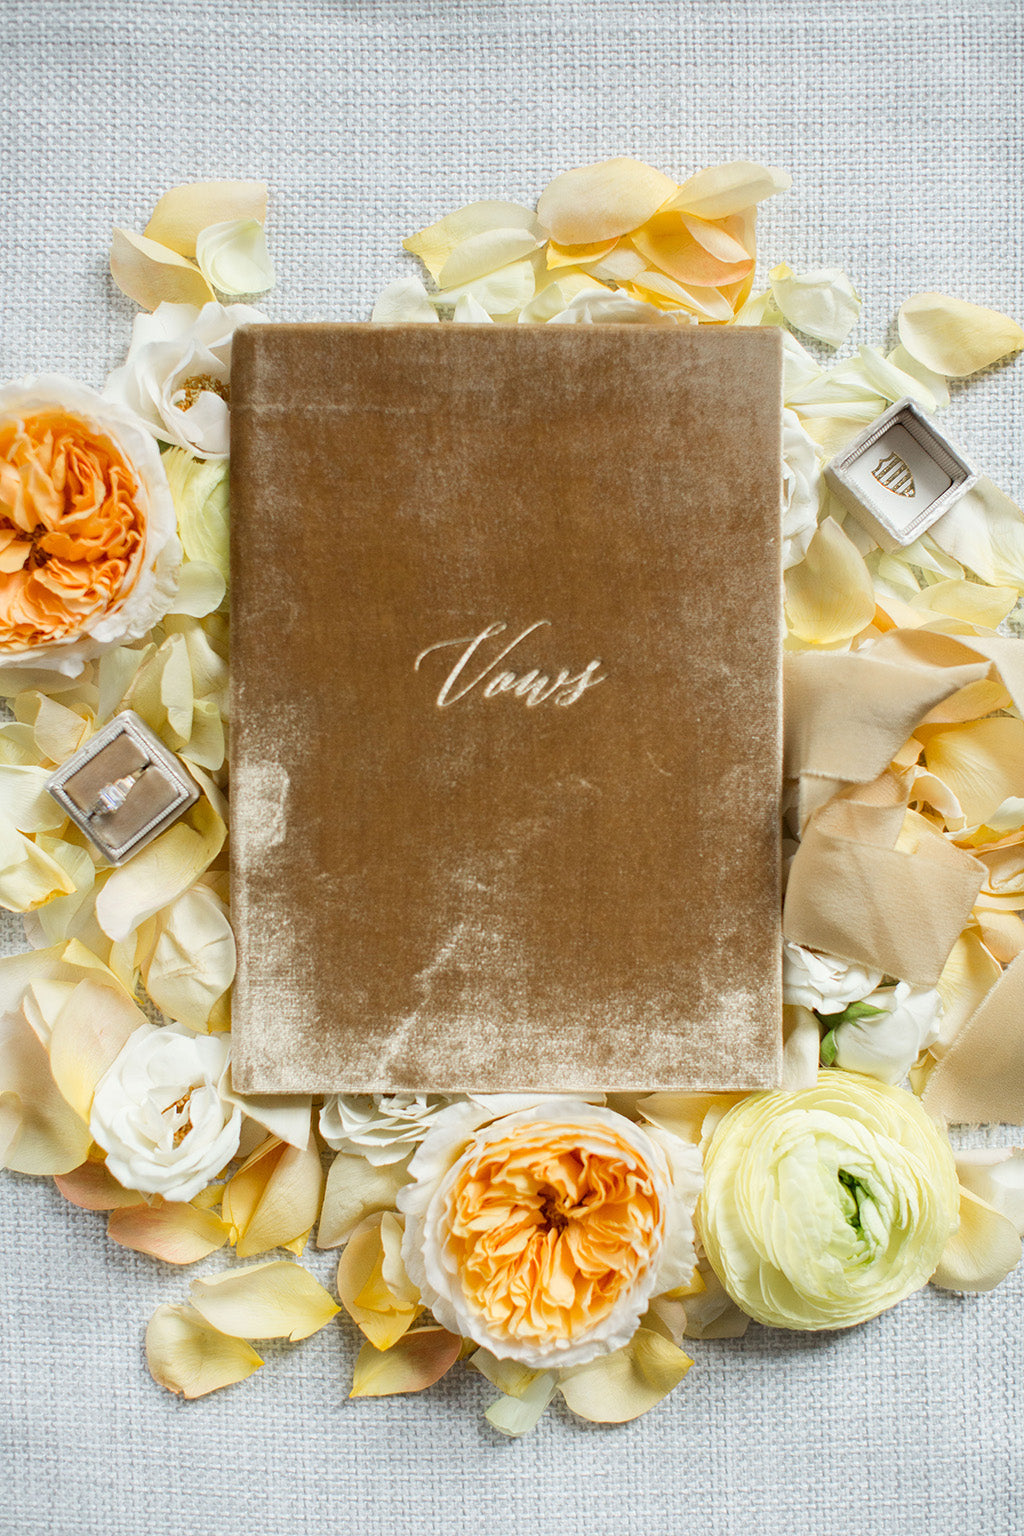 Vows Books in use